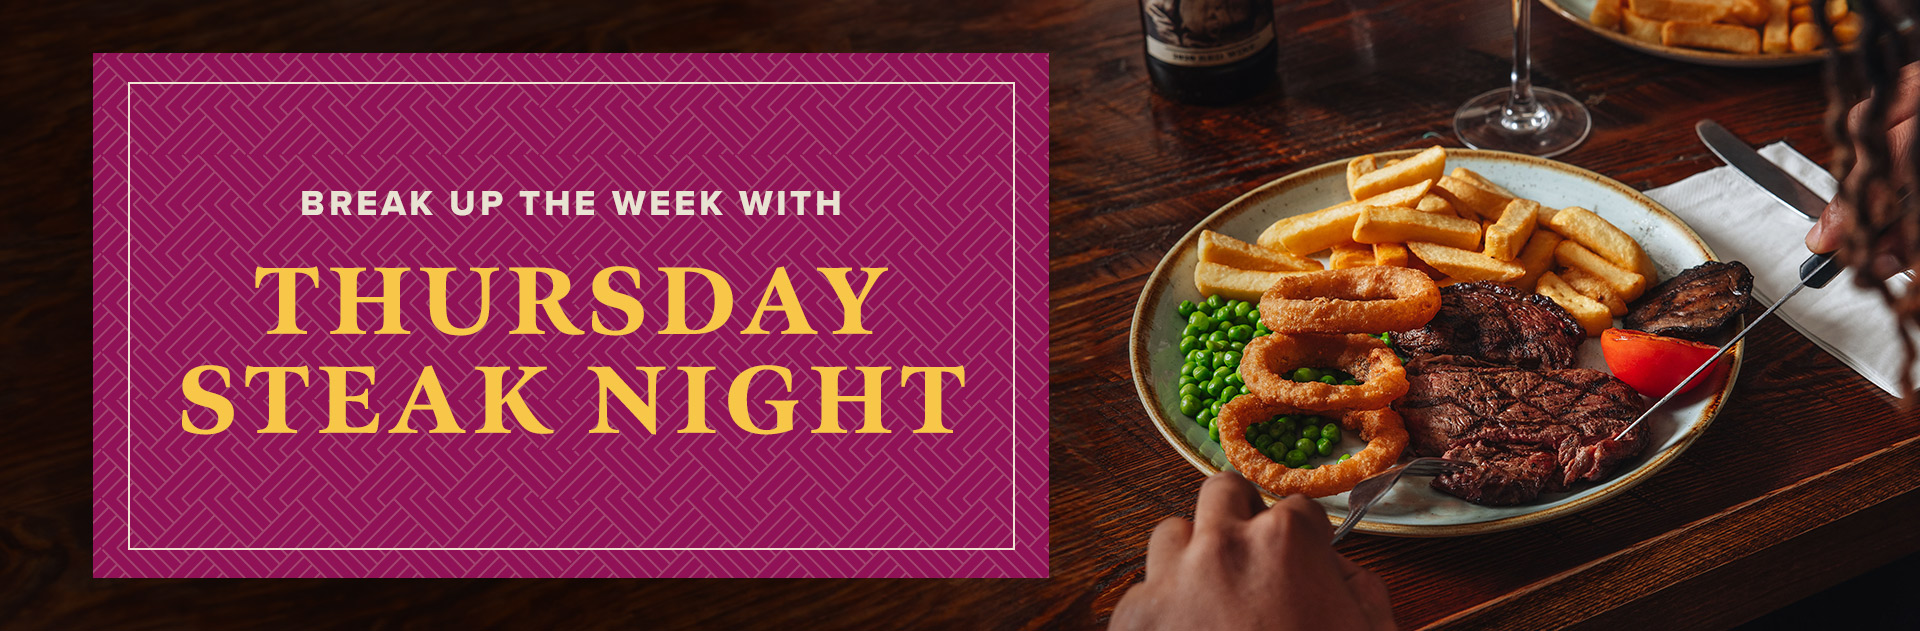 Thursday Steak Night at The Plume of Feathers